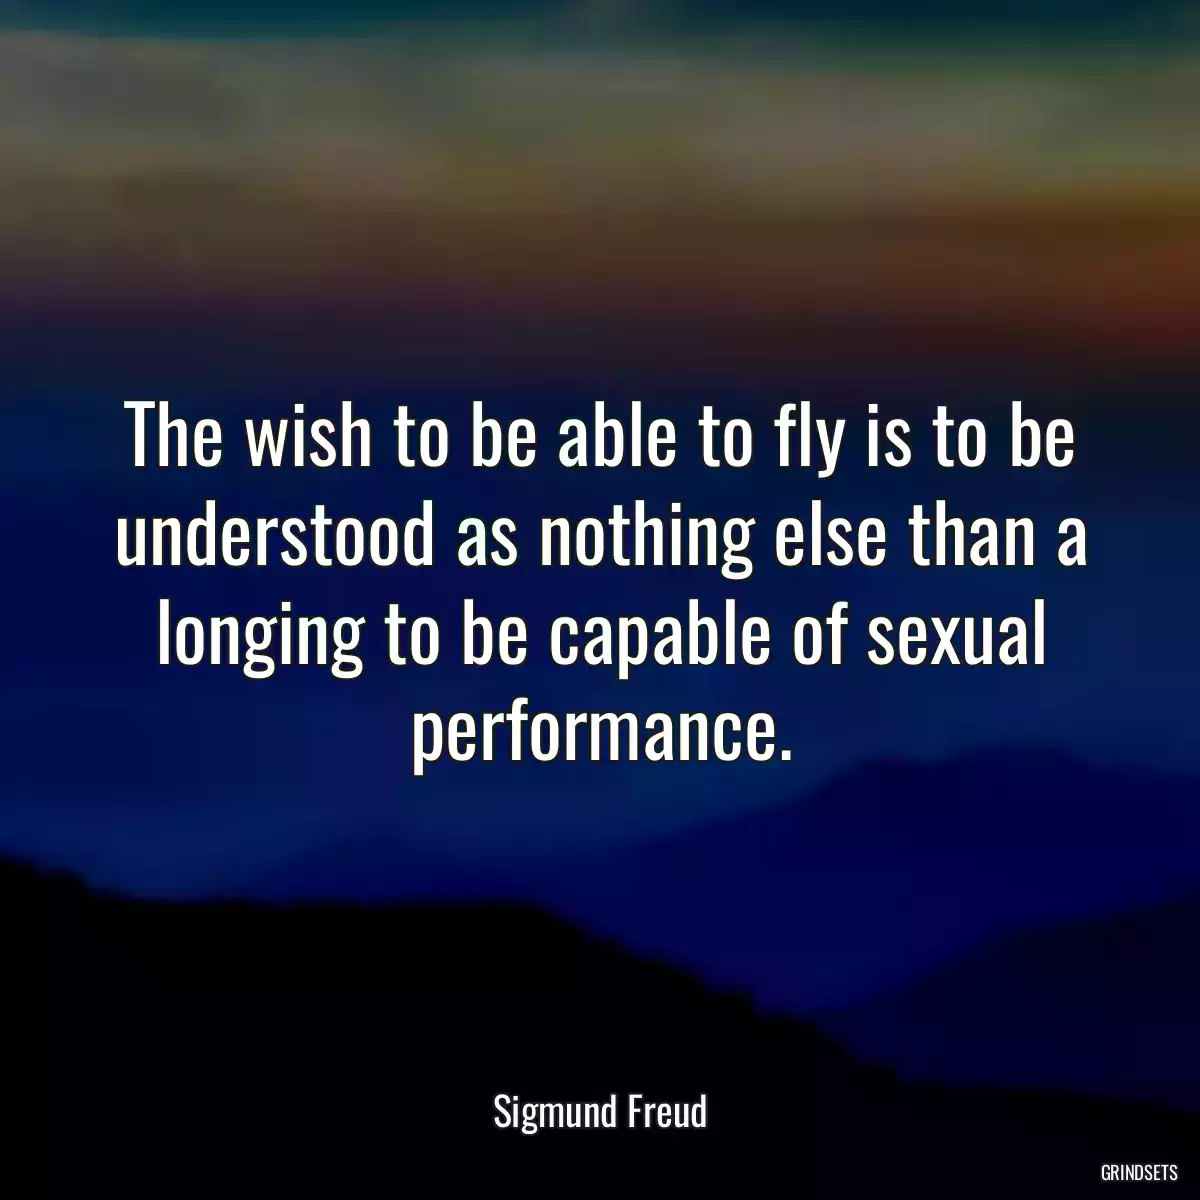 The wish to be able to fly is to be understood as nothing else than a longing to be capable of sexual performance.